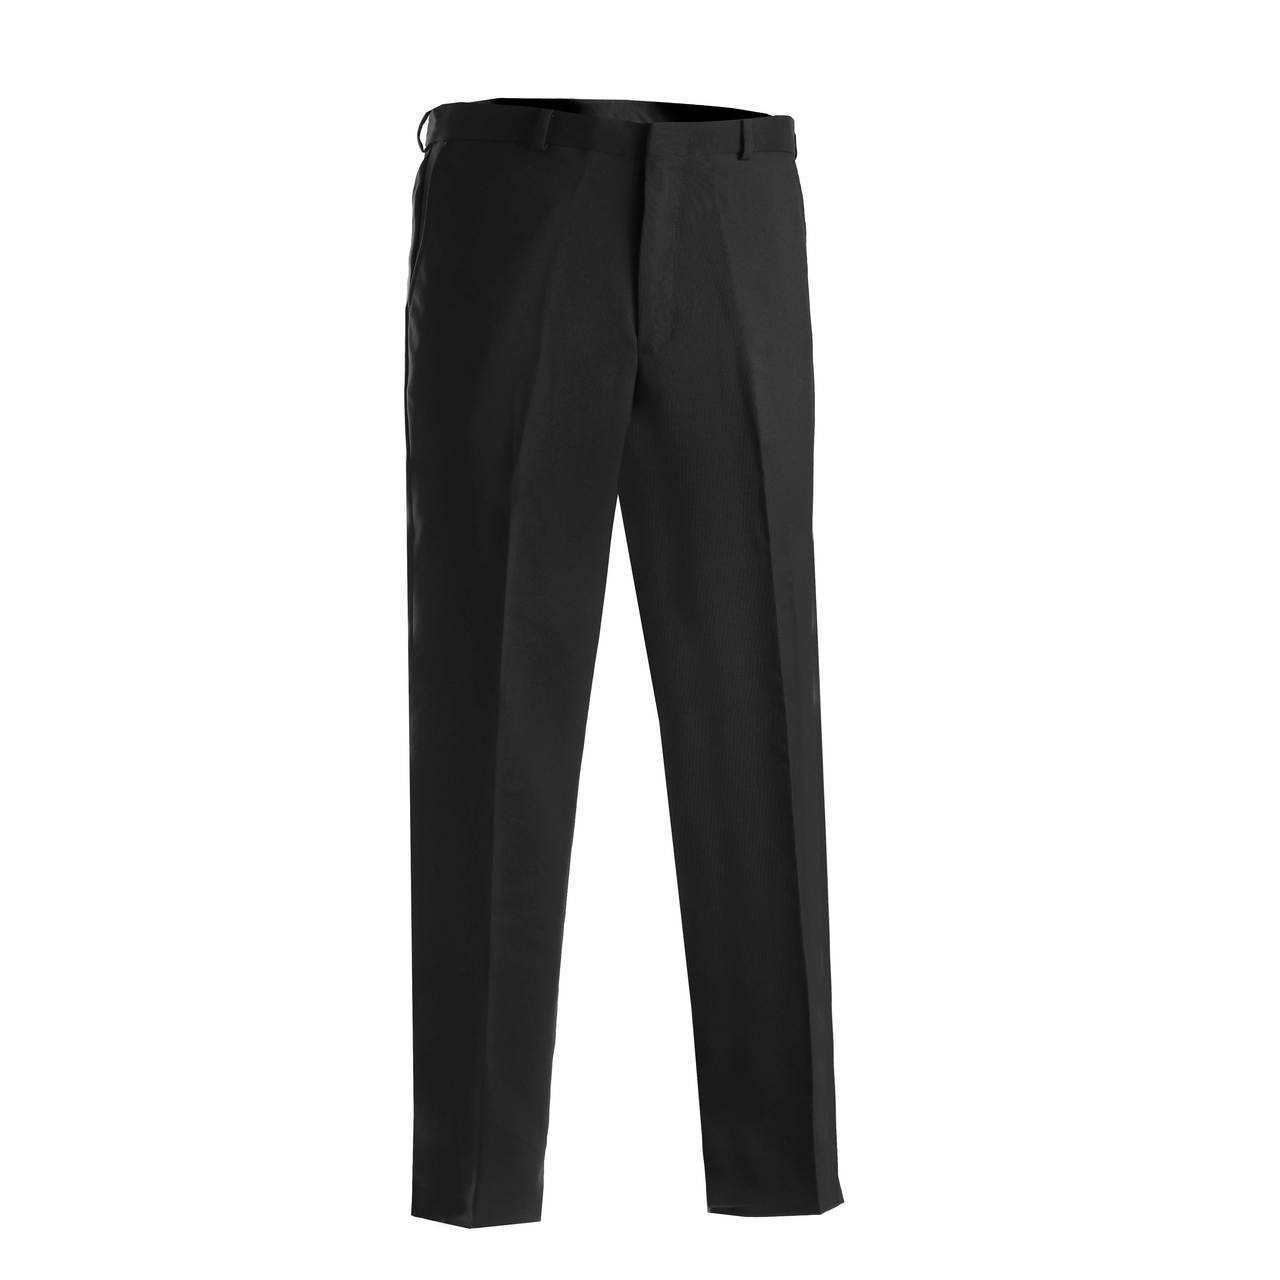 2DXuixsh Pants for Women Peg Pants with Tie Womens Cargo Pants with Pockets  Outdoor Casual Ripstop Camo Construction Work Pants Flare Leggings Women's Pants  Polyester,Spandex Black Xl - Walmart.com